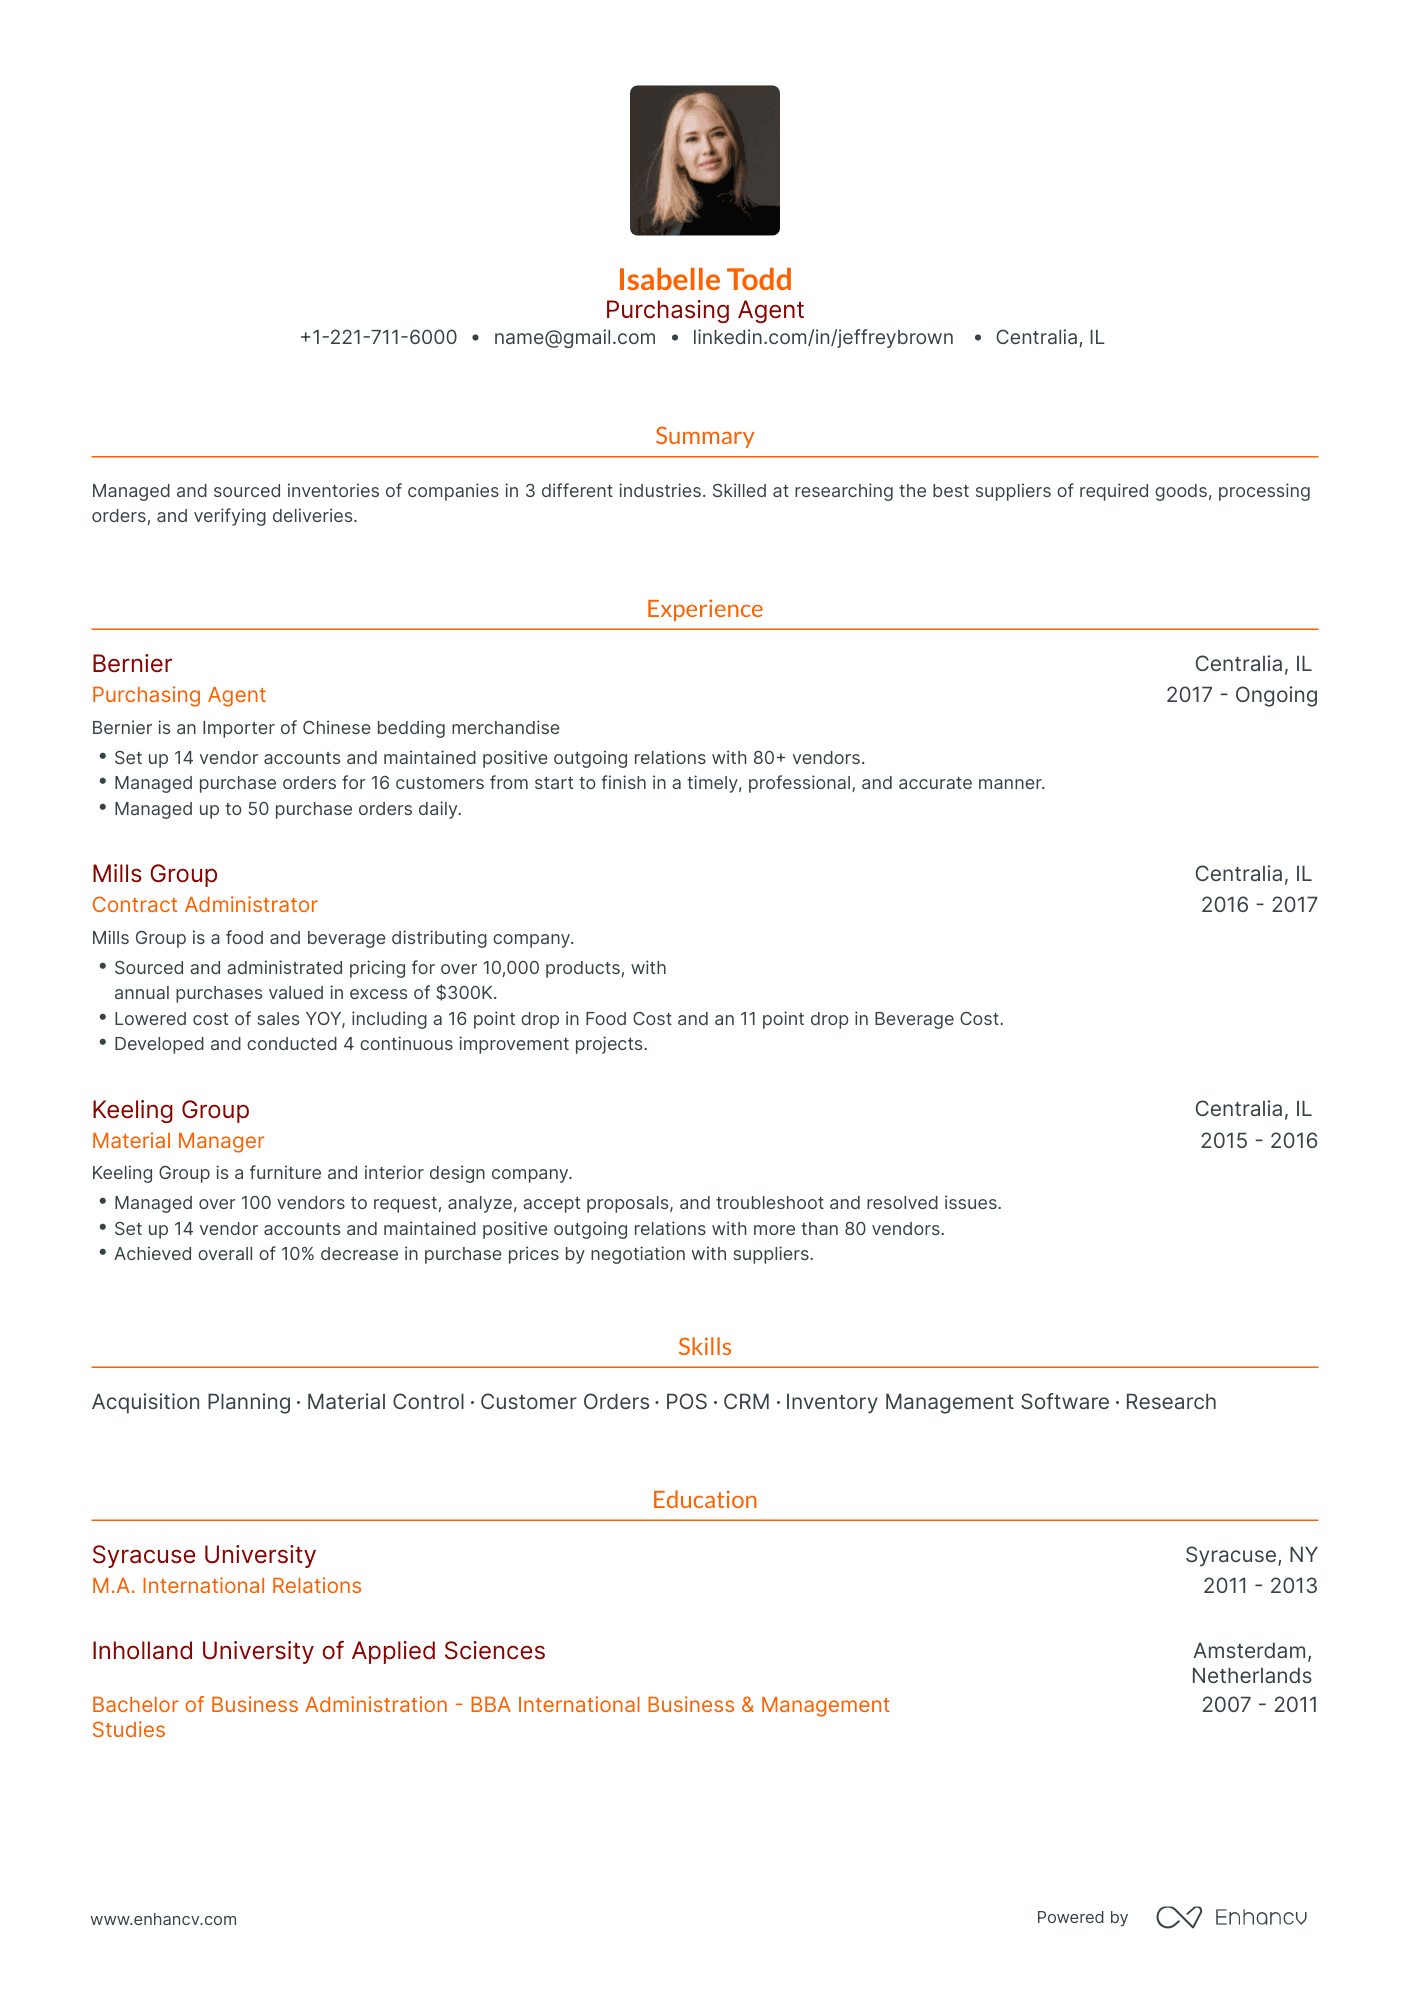 Traditional Purchasing Agent Resume Template